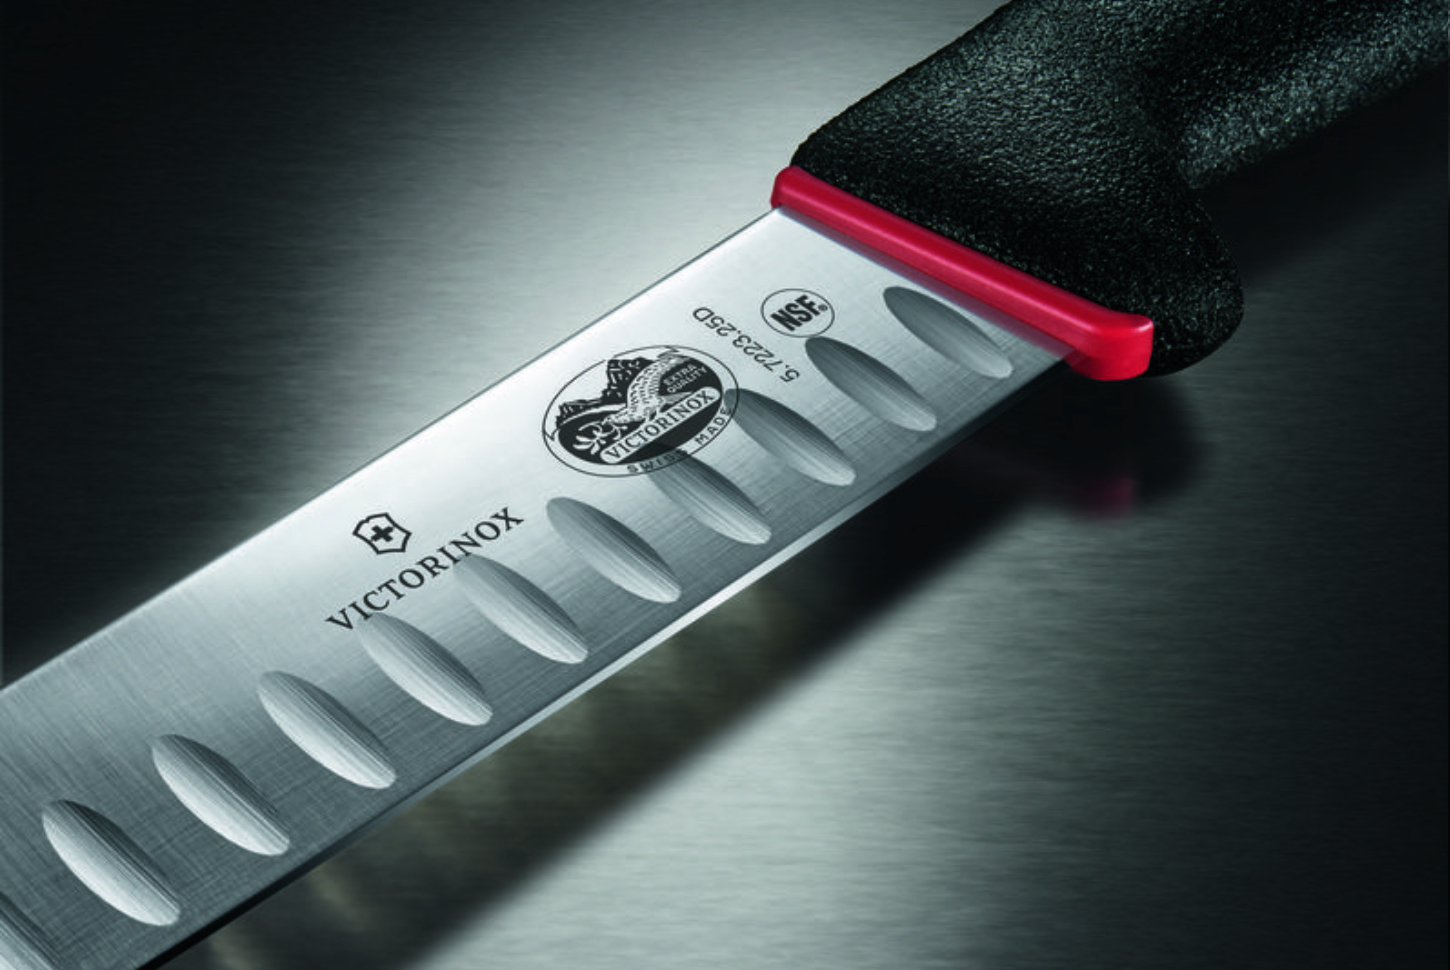 https://www.hospitalitydirectory.com.au/images/product_images/Victorinox/Product_News/2024/2024May01_Dual-Grip/Victorinox_Dual-Grip2.jpg